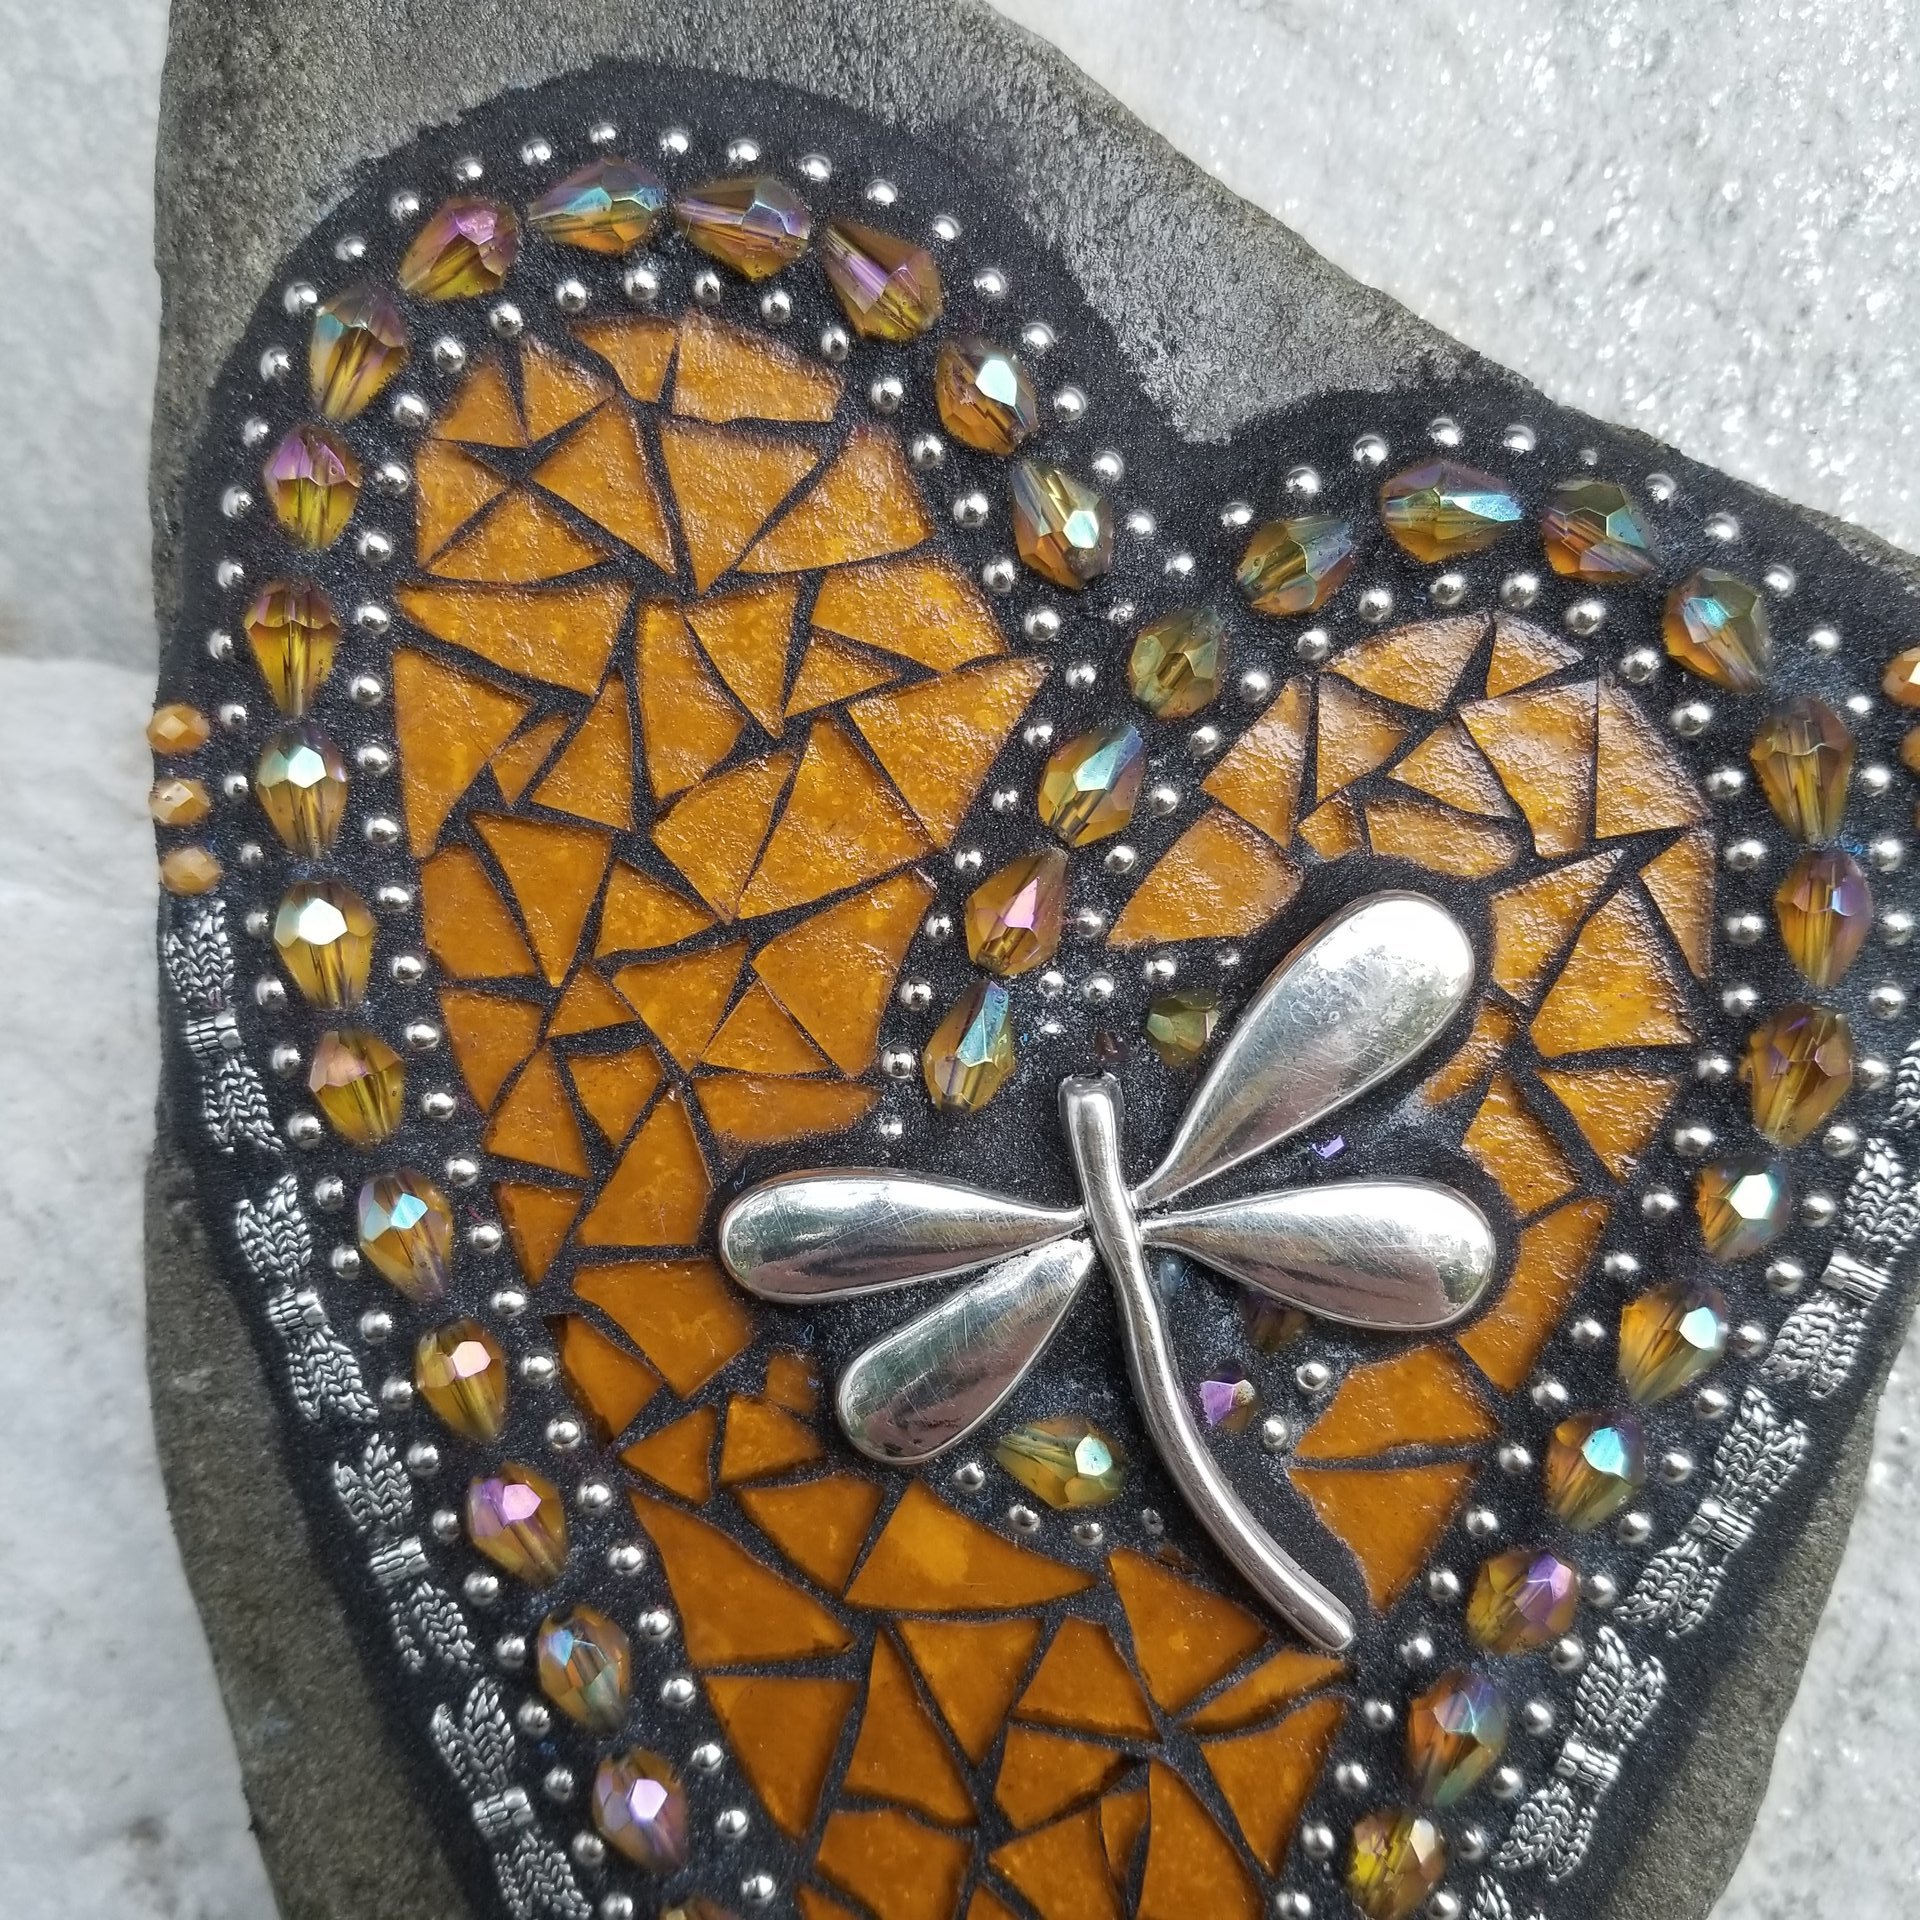 Amber Mosaic Heart Garden Stone with Dragonfly